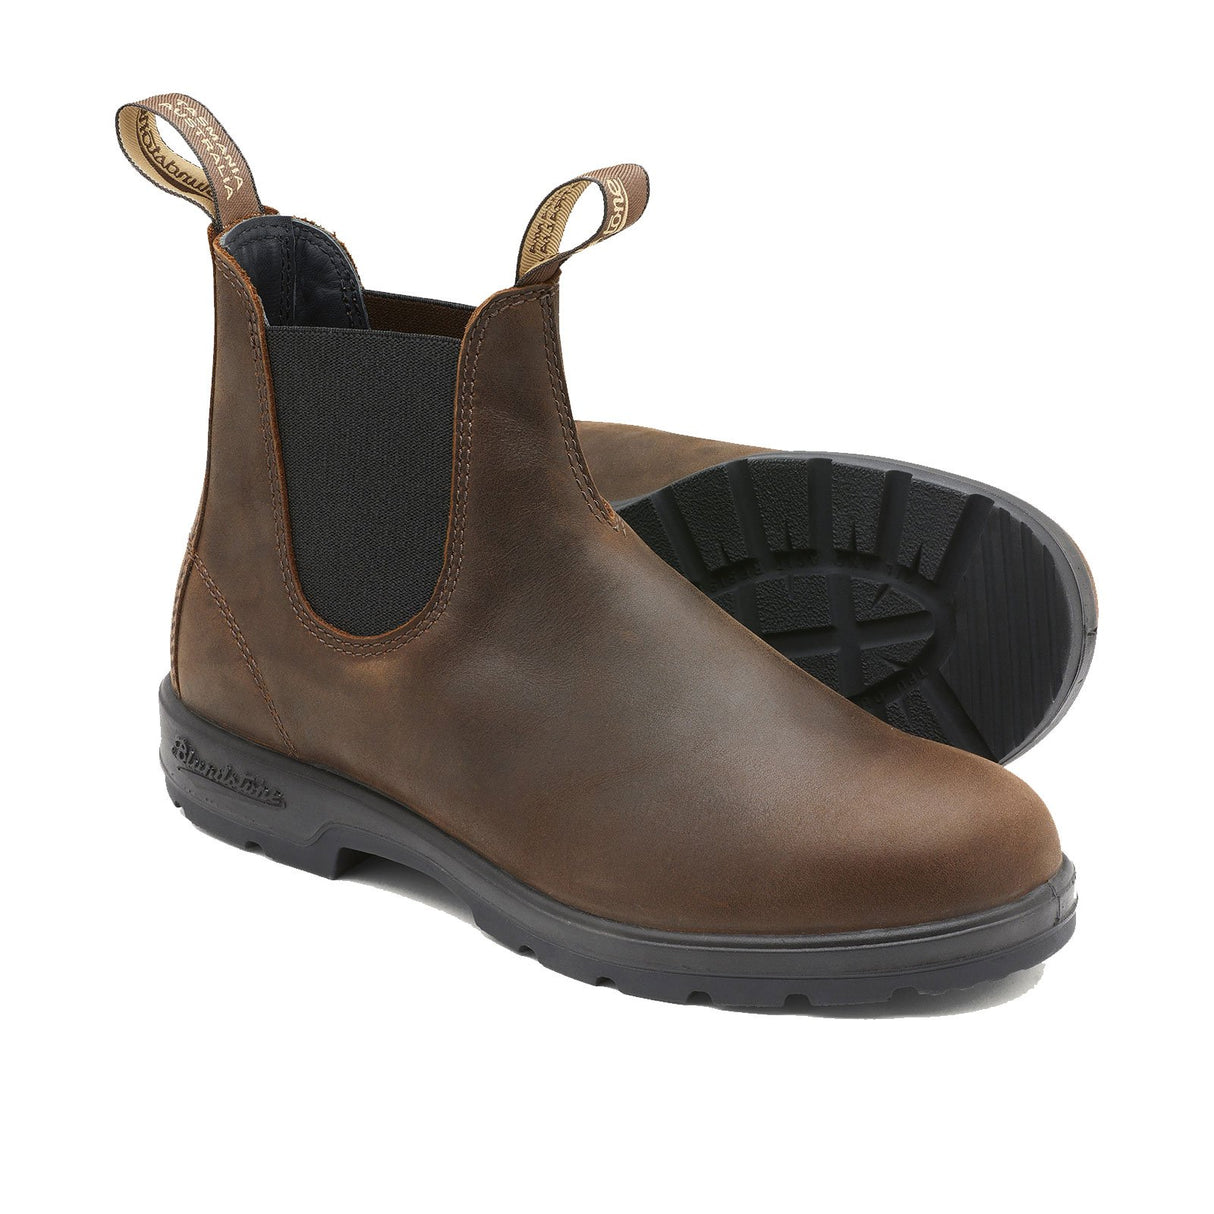 Blundstone Classic Chelsea (Unisex) - Antique Brown Boots - Fashion - Chelsea - The Heel Shoe Fitters